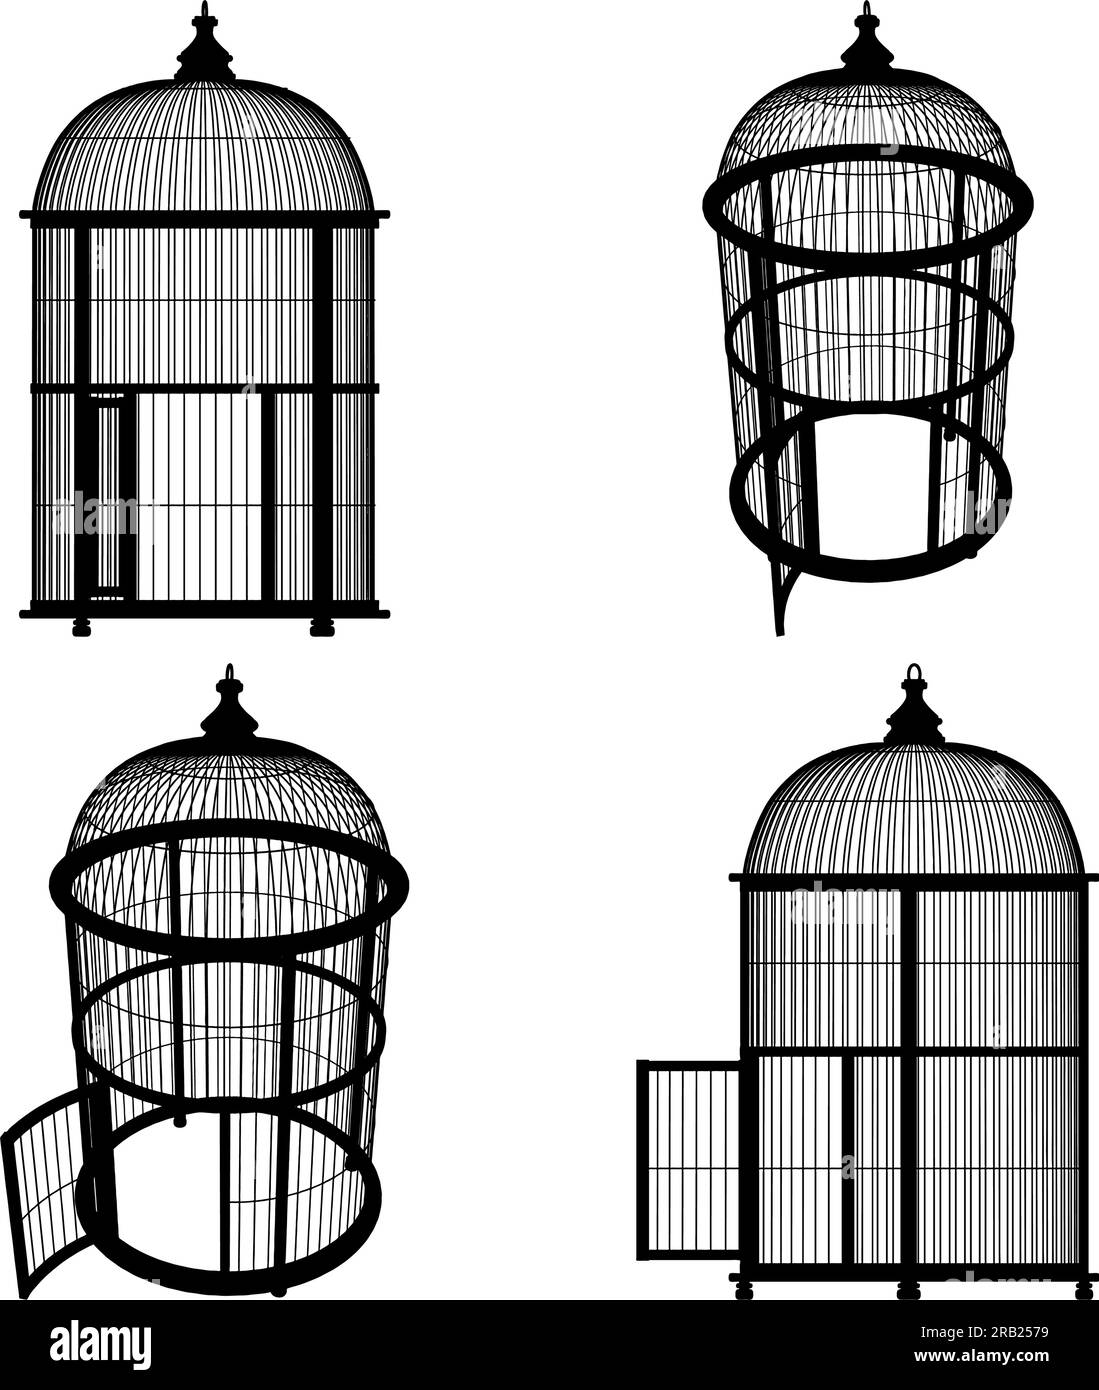 Birdcage Vector. Illustration Isolated On White Background. A Vector Illustration Of Birdcage. Stock Vector